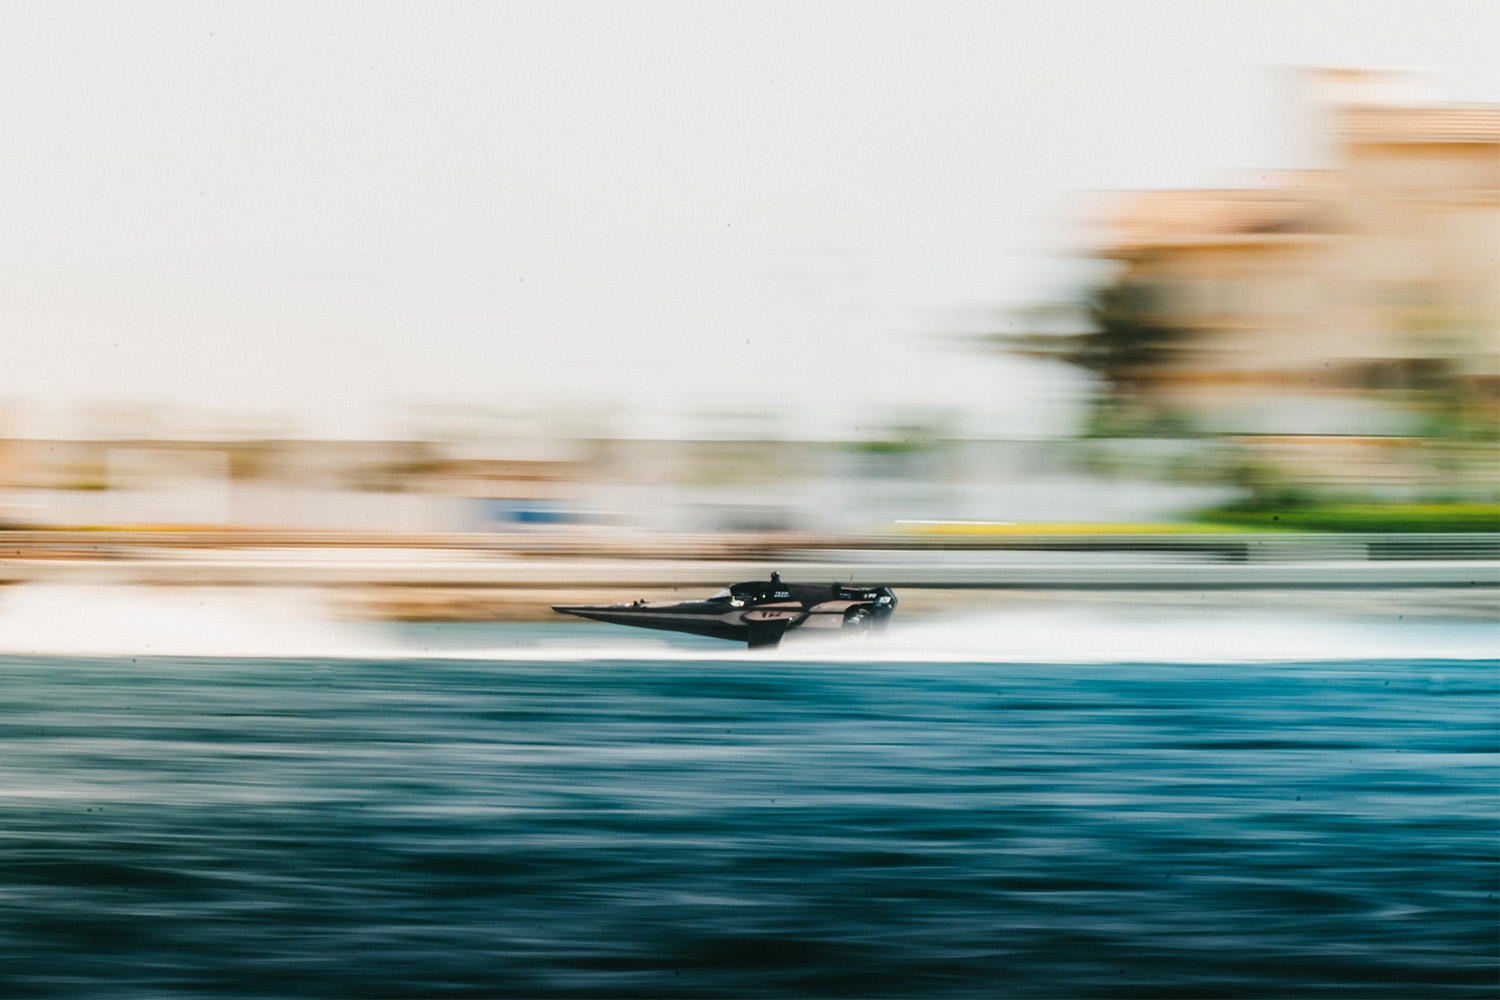 A blurry image of a powerboat racing across the water.